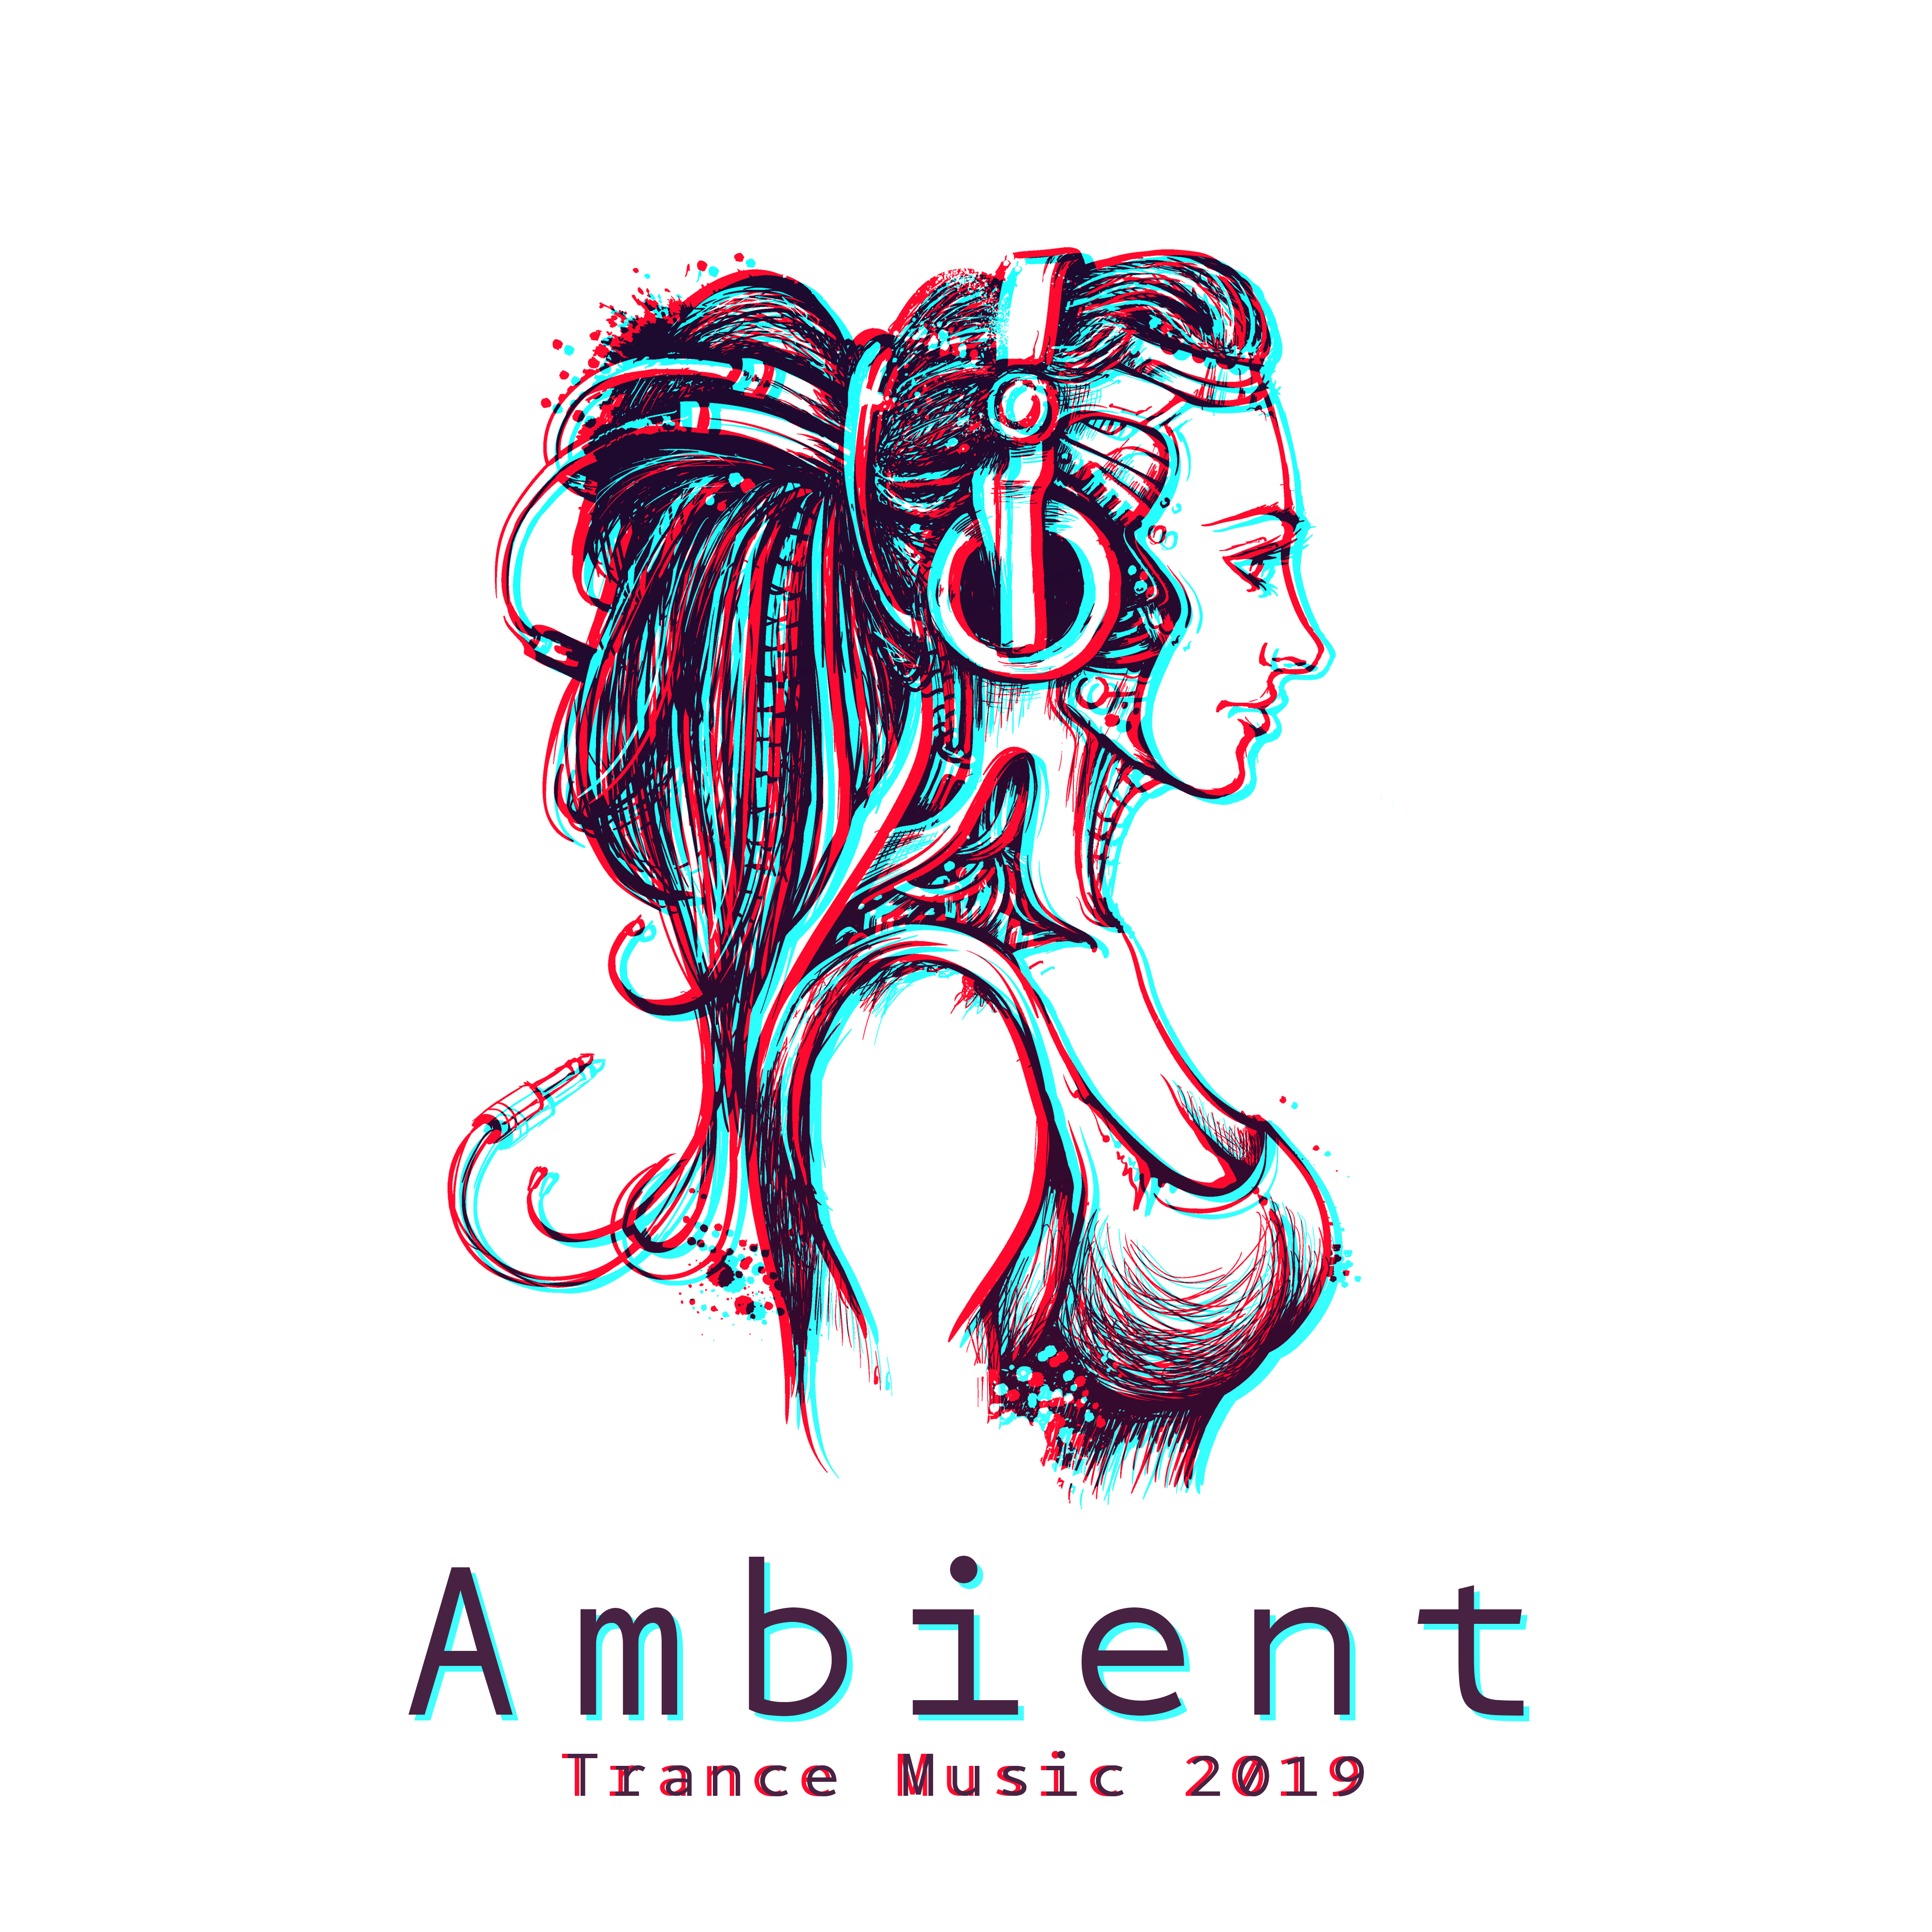 Ambient Trance Music 2019